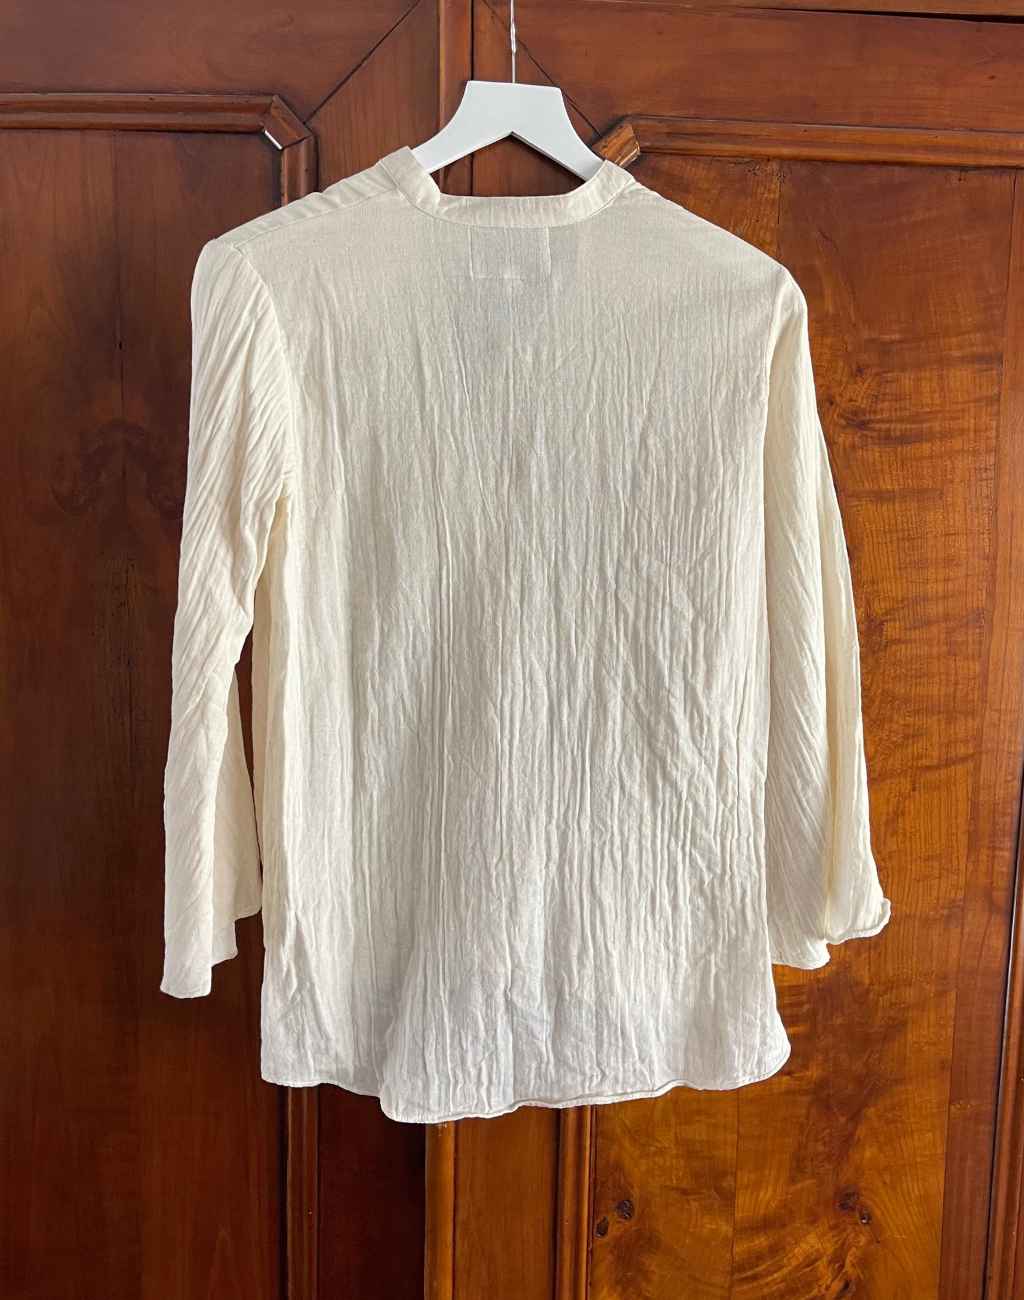 Double Cloth Cotton Paros Top with Bell Sleeves - Visit Nifty LIDO 